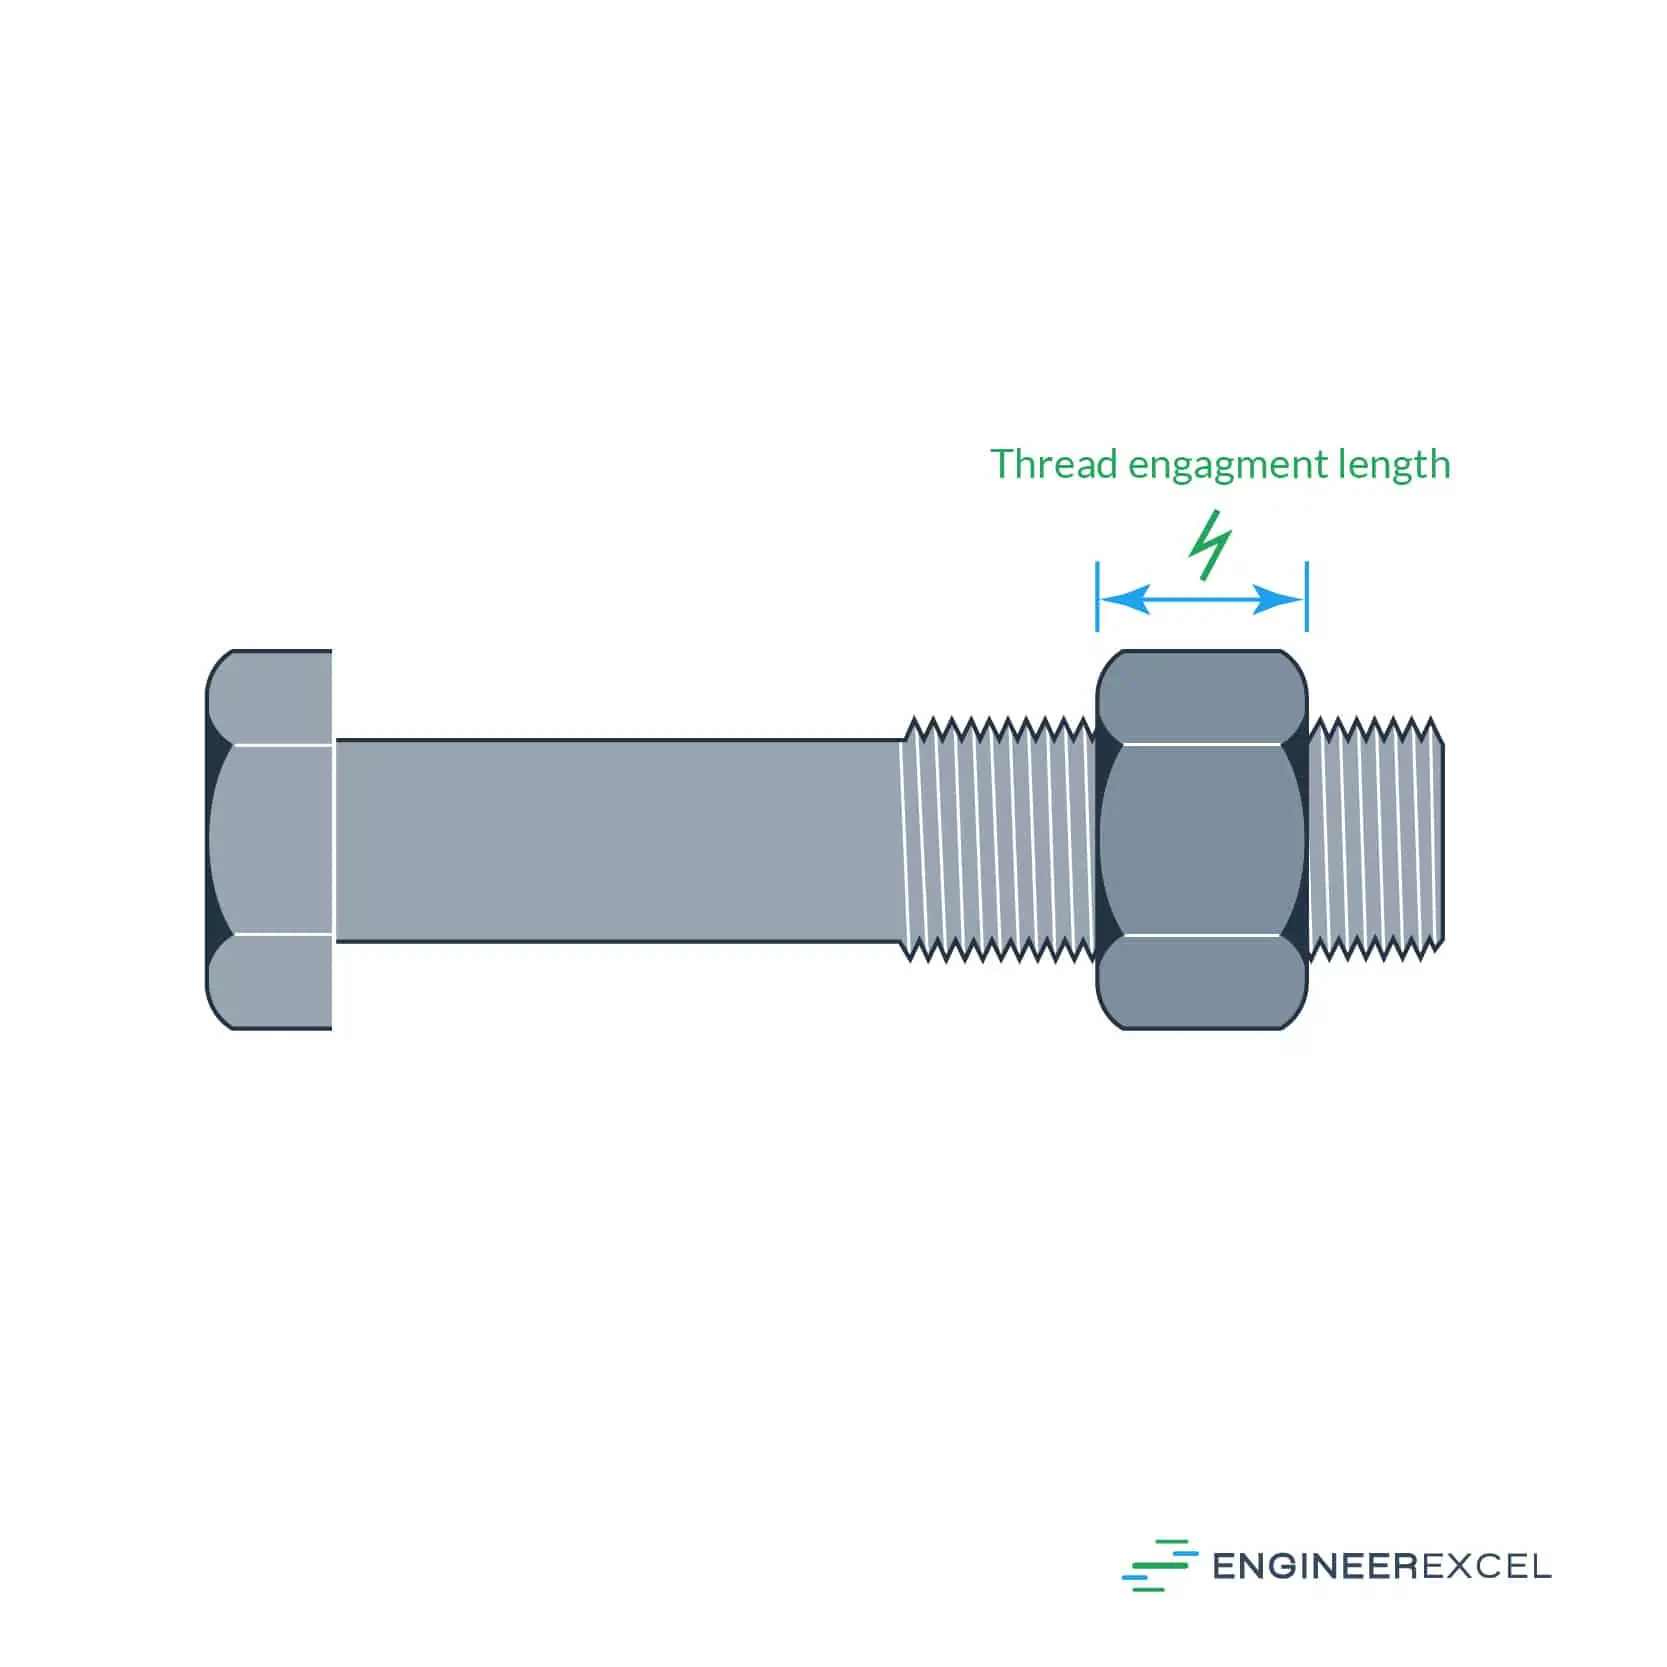 A bolt and nut assembly showing the thread engagement length